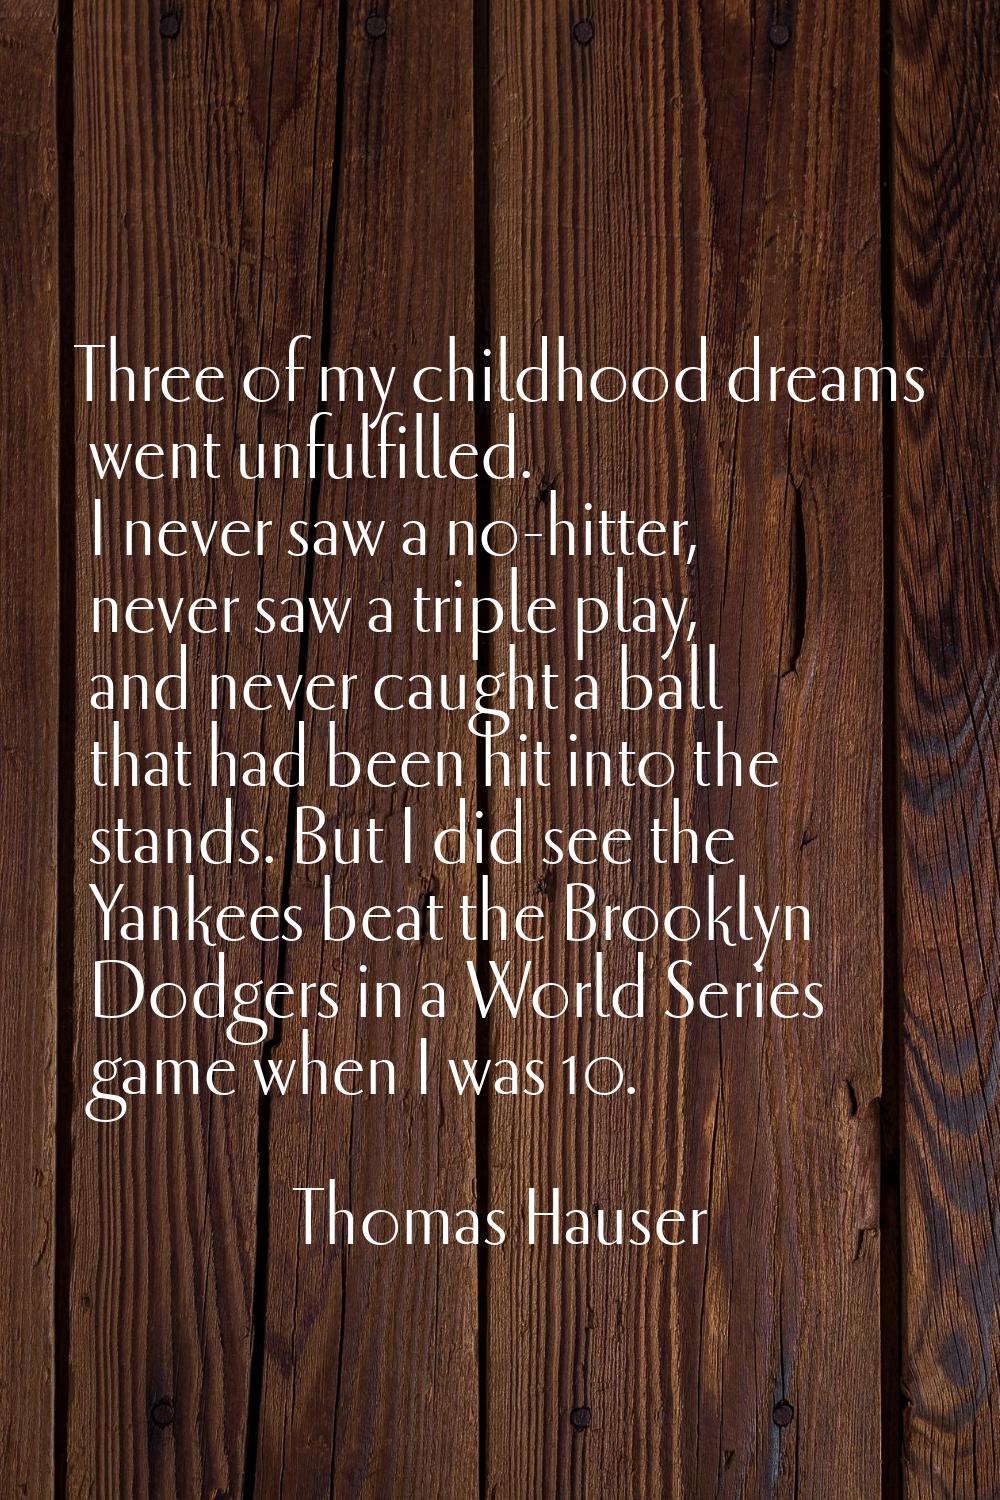 Three of my childhood dreams went unfulfilled. I never saw a no-hitter, never saw a triple play, an